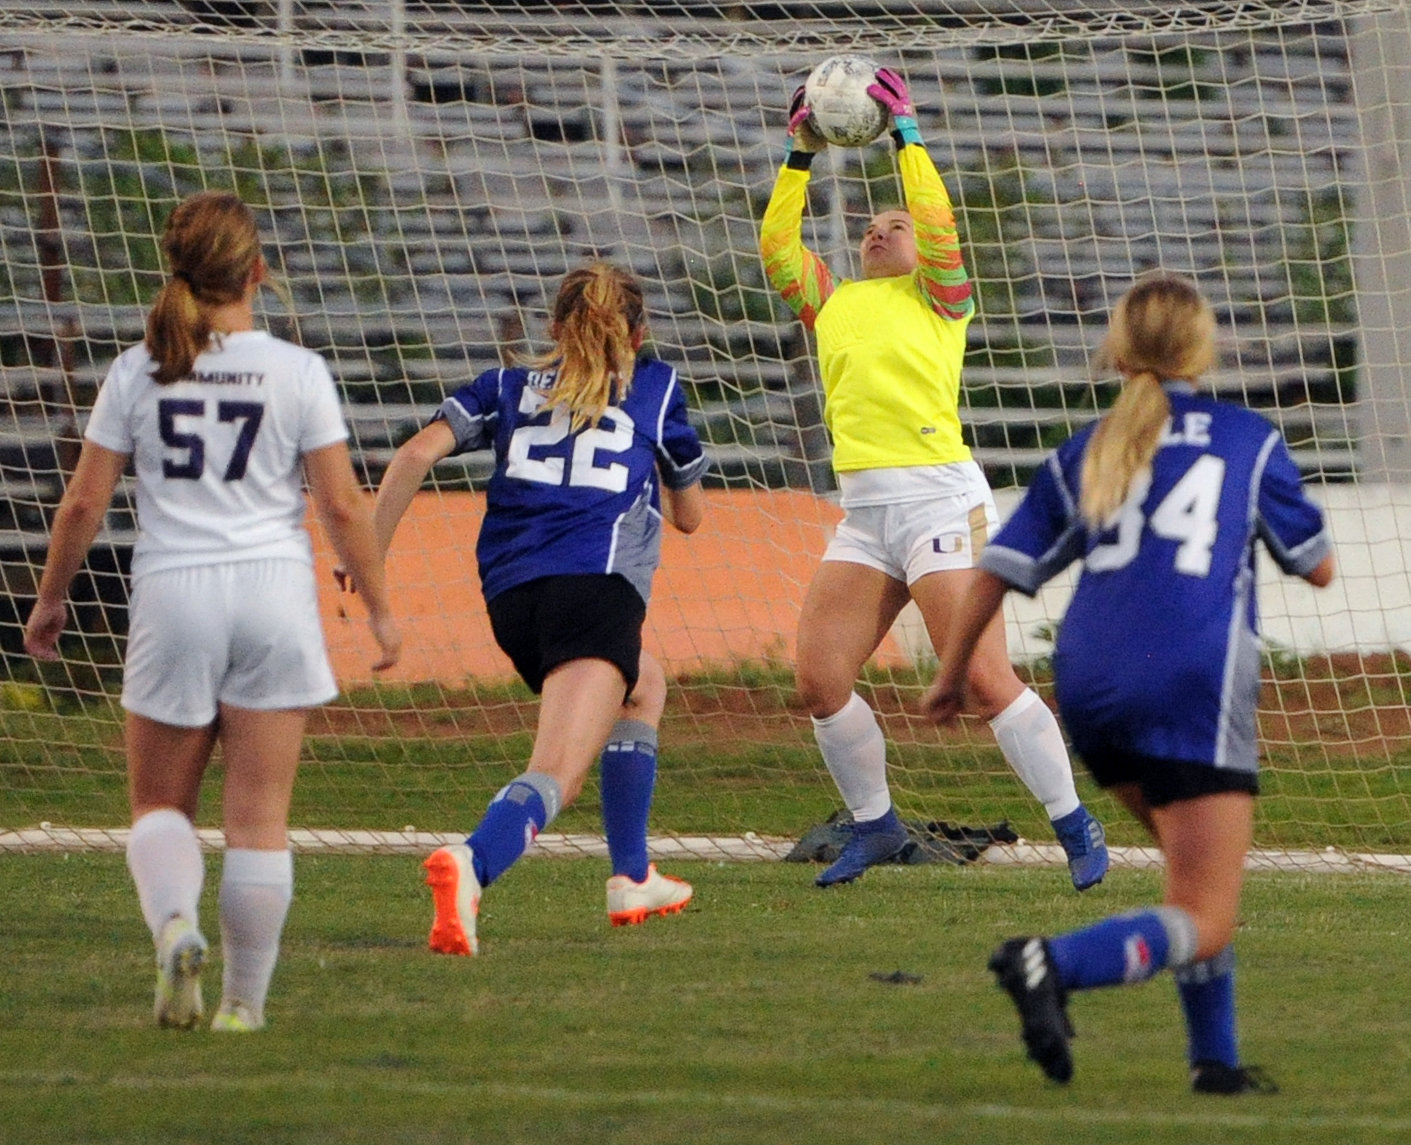 Community keeper Carlie Blanton makes a save on a long shot by the Lady Rockets.